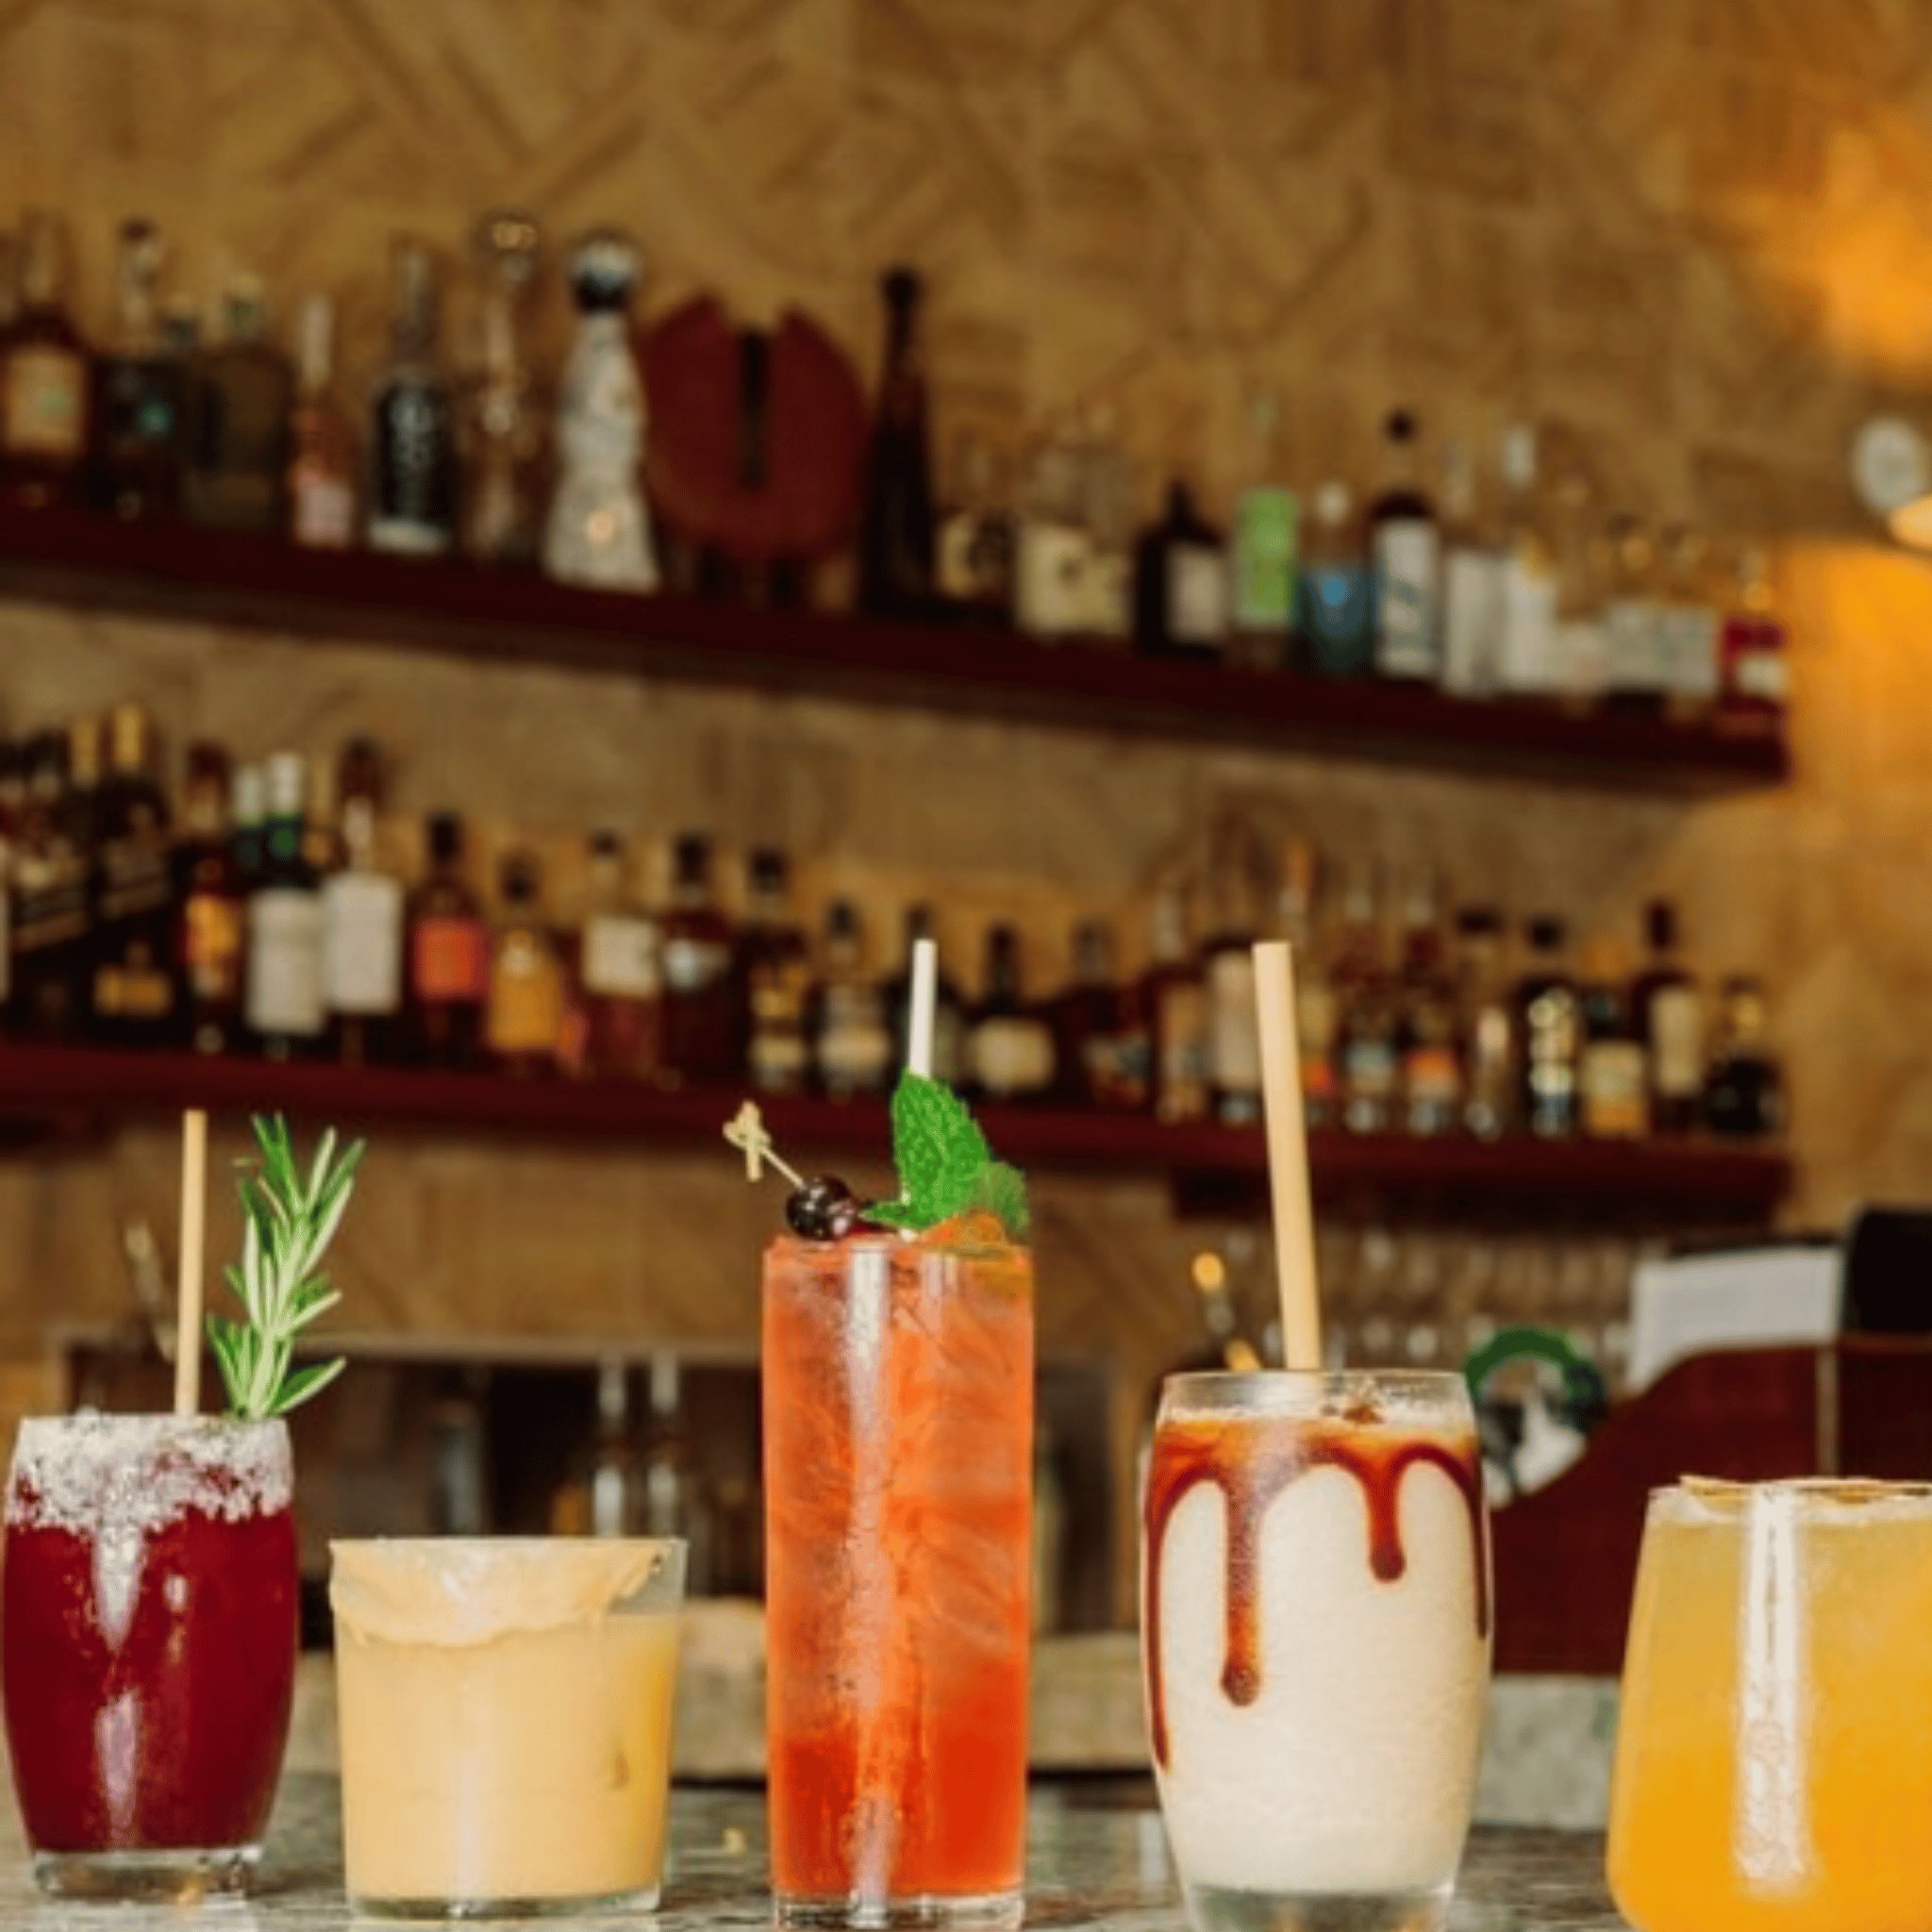 A variety of five colorful cocktails on a bar counter including a margarita with a salt rim, a tall glass of red sangria with a fruit garnish, a long drink with a sprig of rosemary, a creamy cocktail topped with a chocolate swirl, and a bright yellow drink in a short glass. Each cocktail features a different type of garnish, emphasizing their unique flavors and presentations. In the background, an extensive collection of liquor bottles is displayed on wooden shelves, enhancing the ambiance.